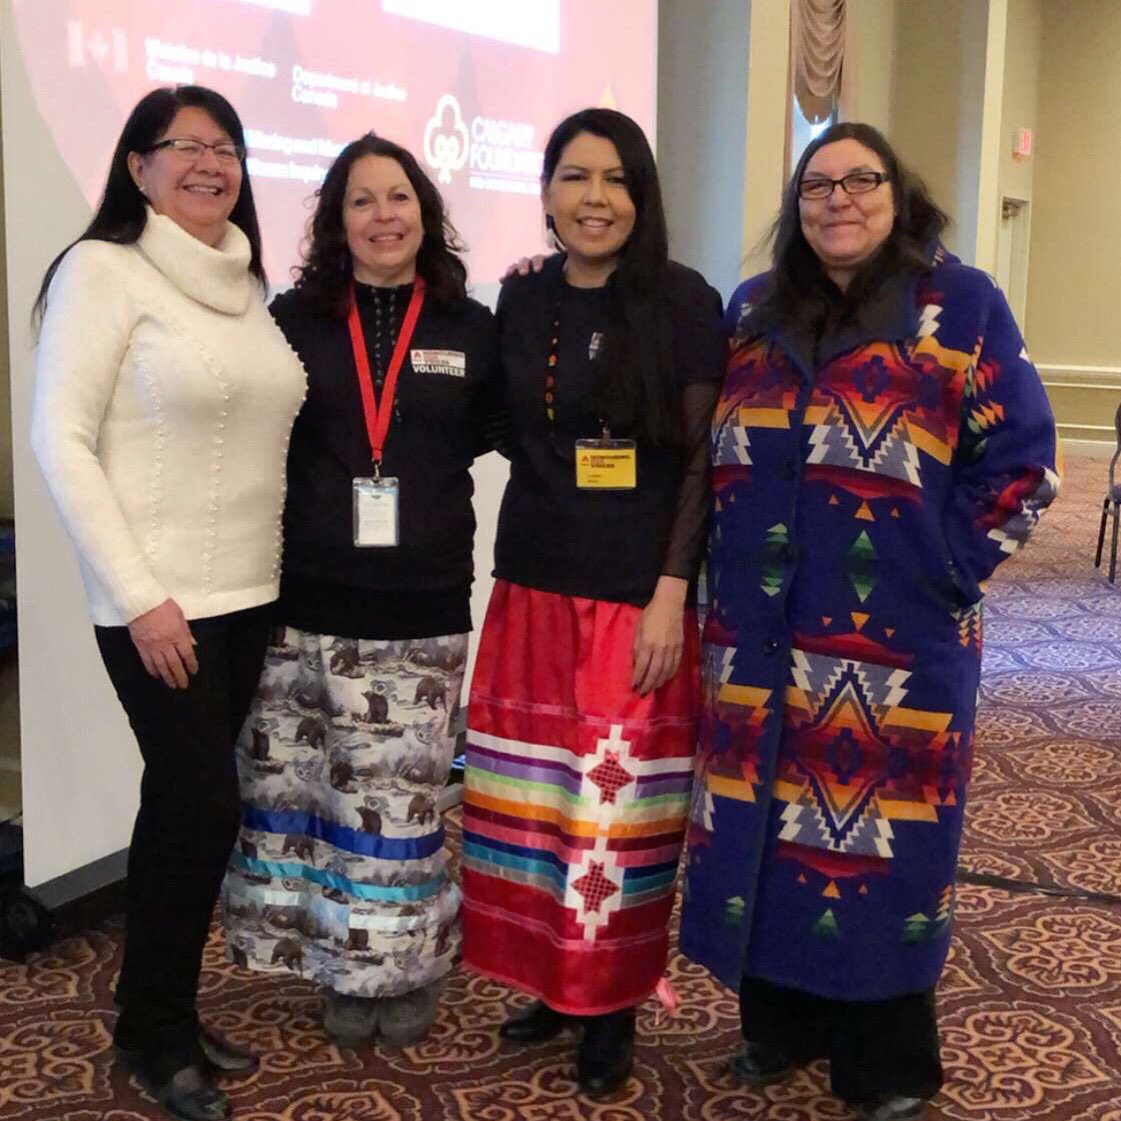 At Honouring Our Voices on the final day with some of my role models who are strong Indigenous women: Veronica, Katelyn & Monica ❤️💕🙏🏽#thankful #friends #family #HOV2019 #community #indigenous